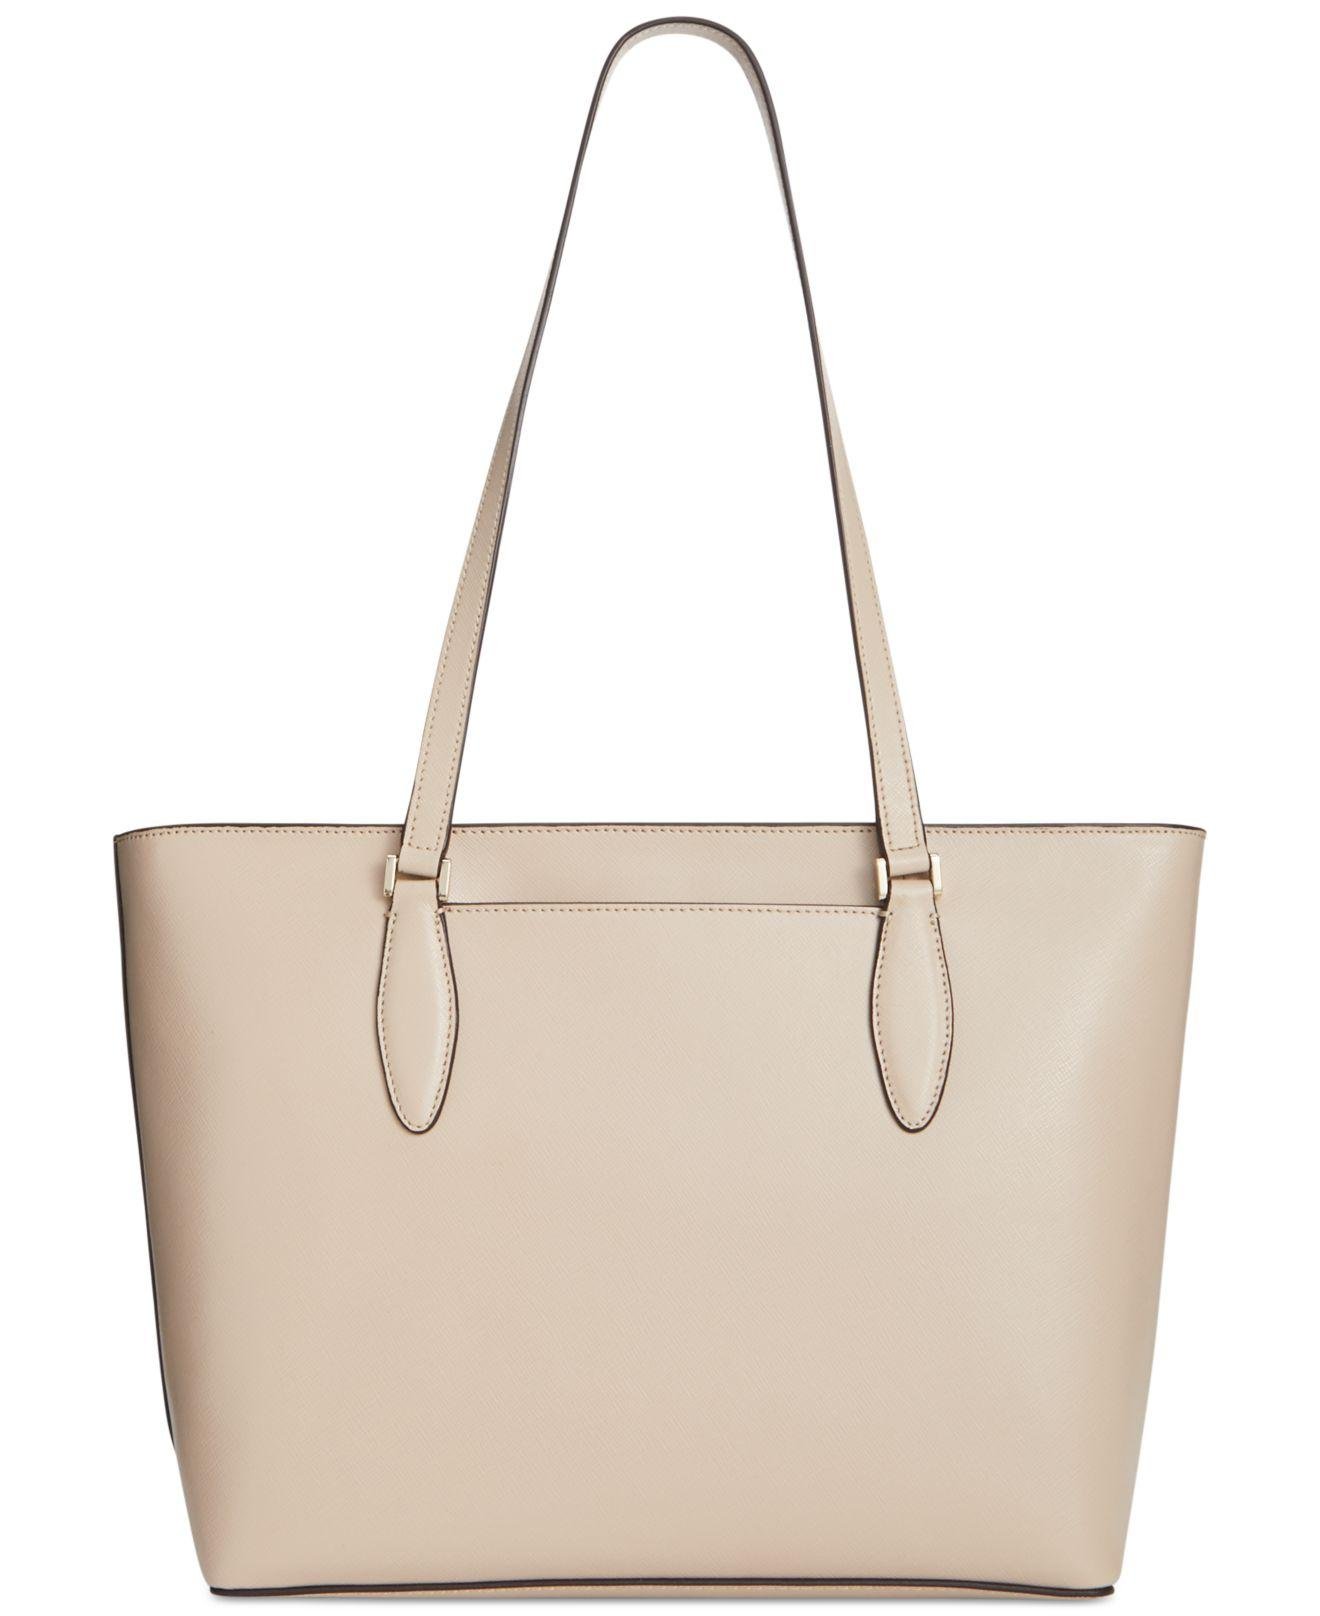 Kate Spade Daily Colorblock Saffiano Top Zip Tote Bag In (Warm Beige)